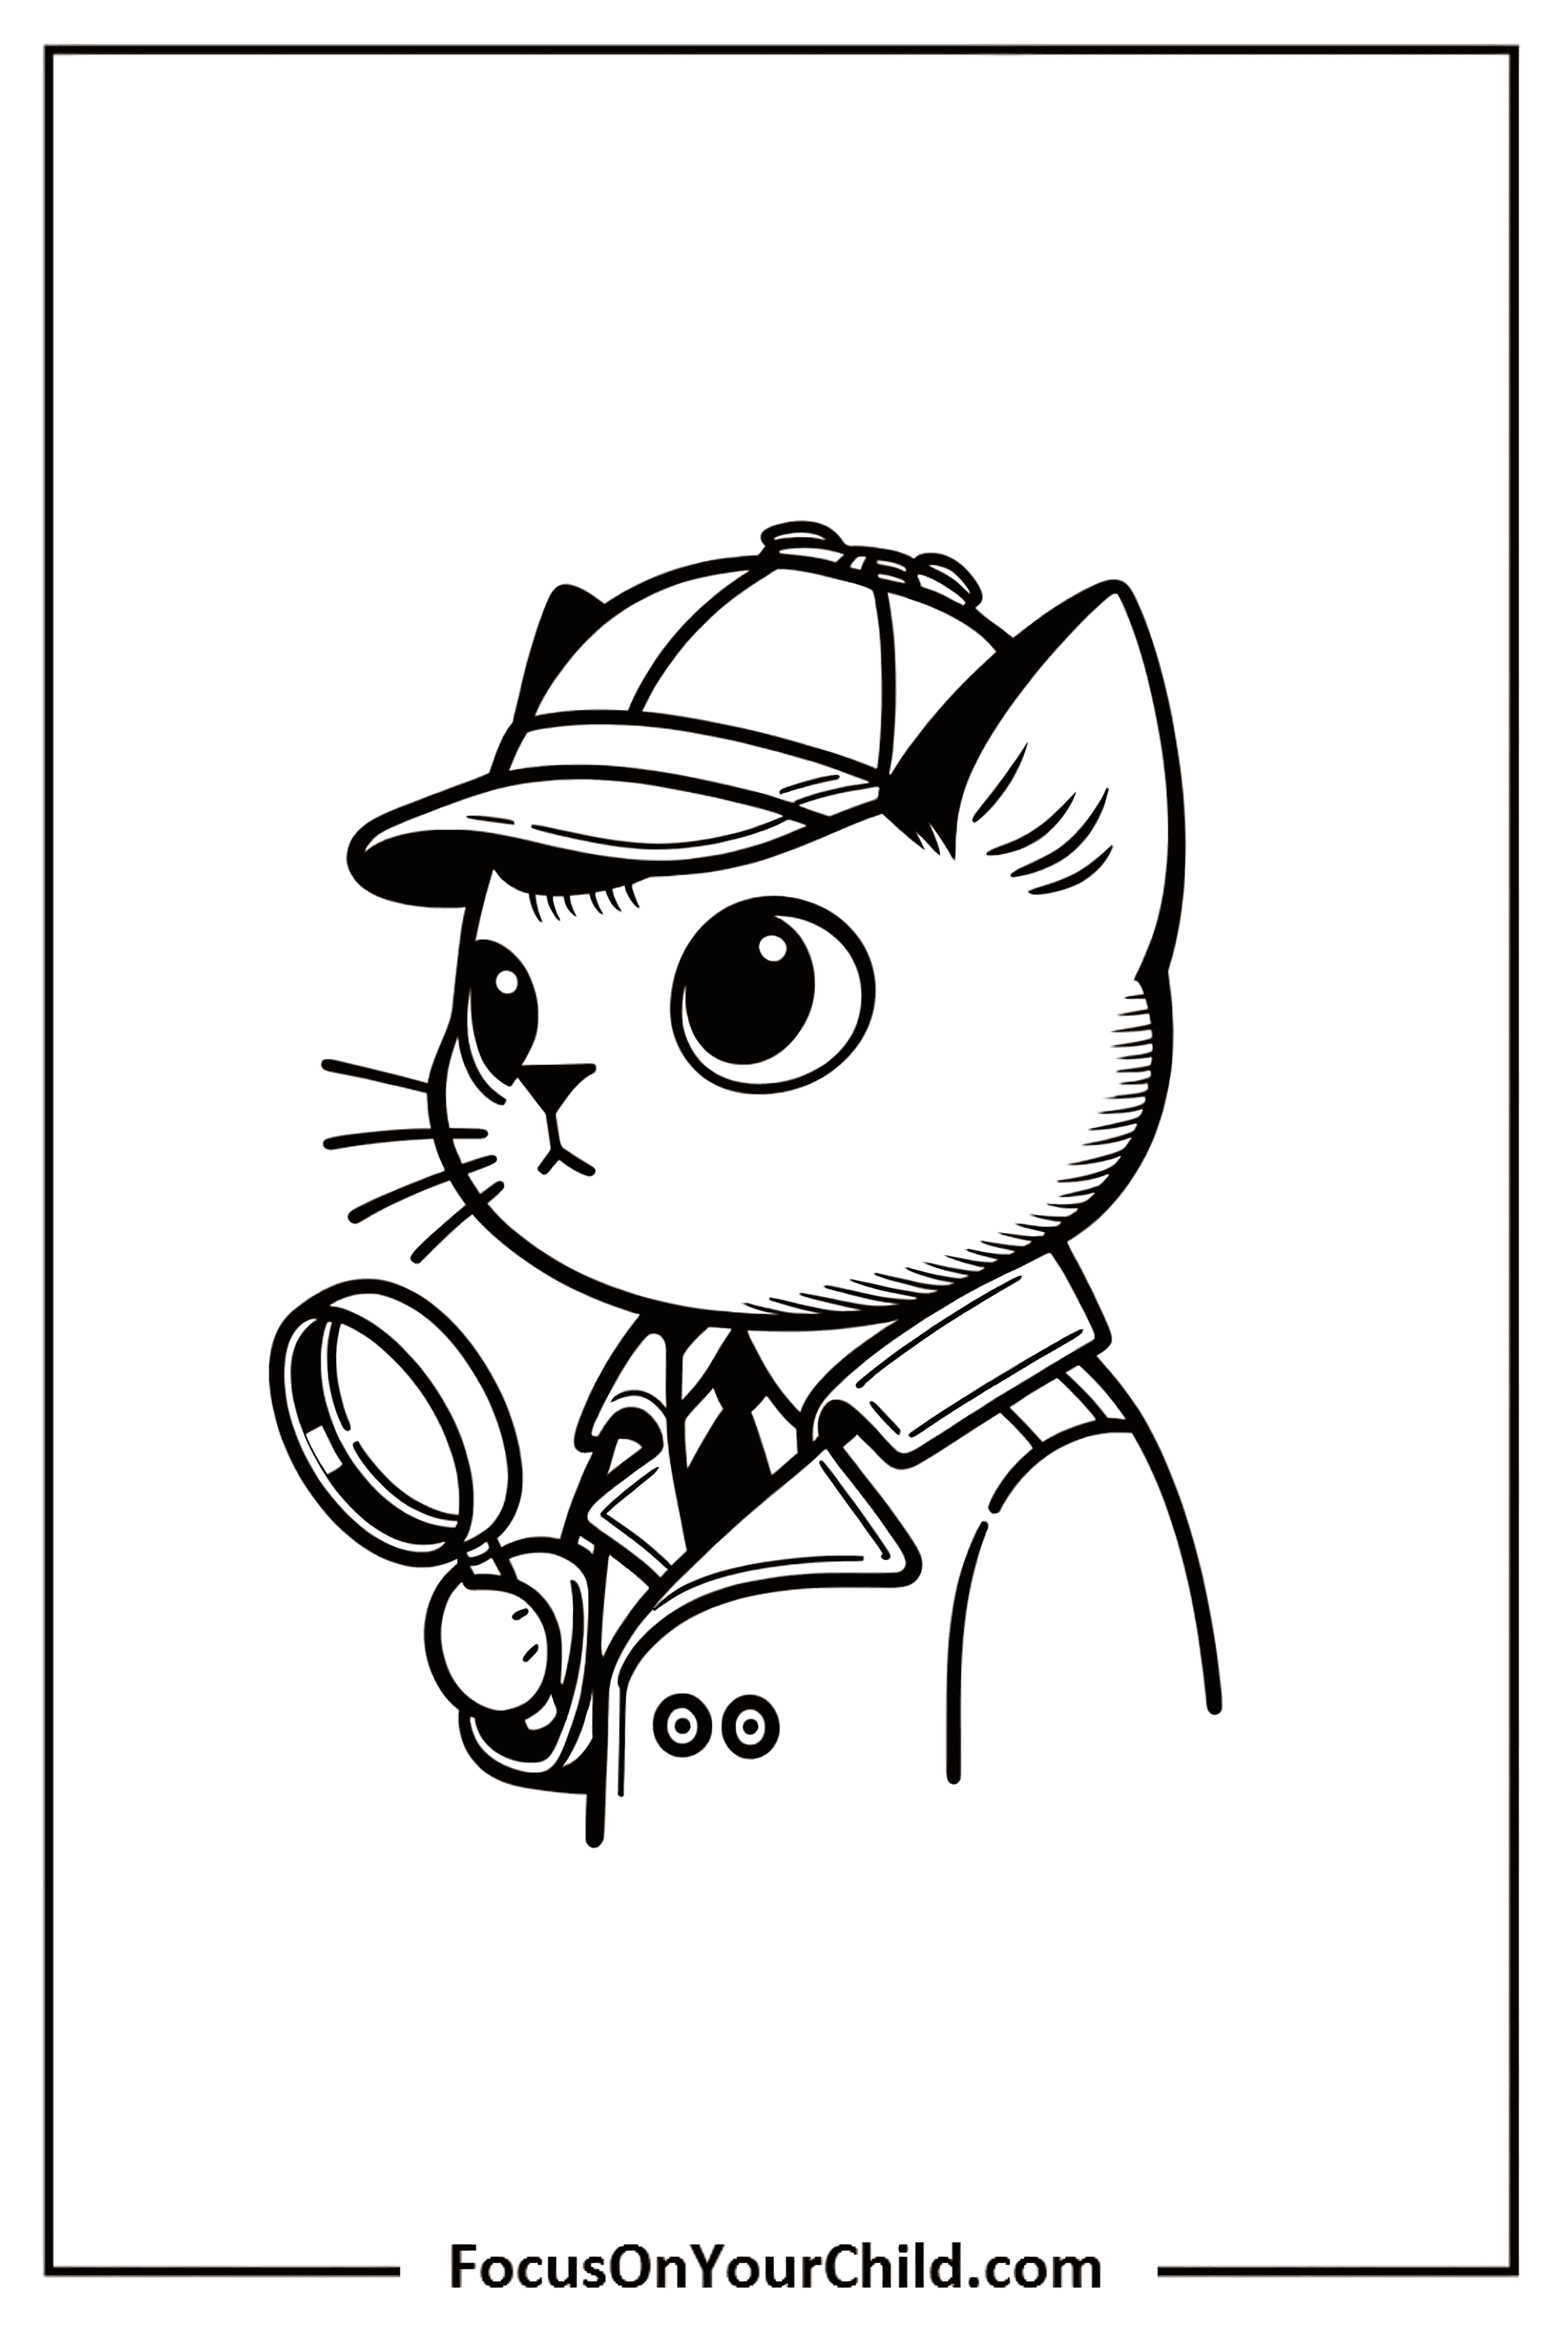 Adorable detective cat in trench coat and magnifying glass, whimsically investigating mysteries.